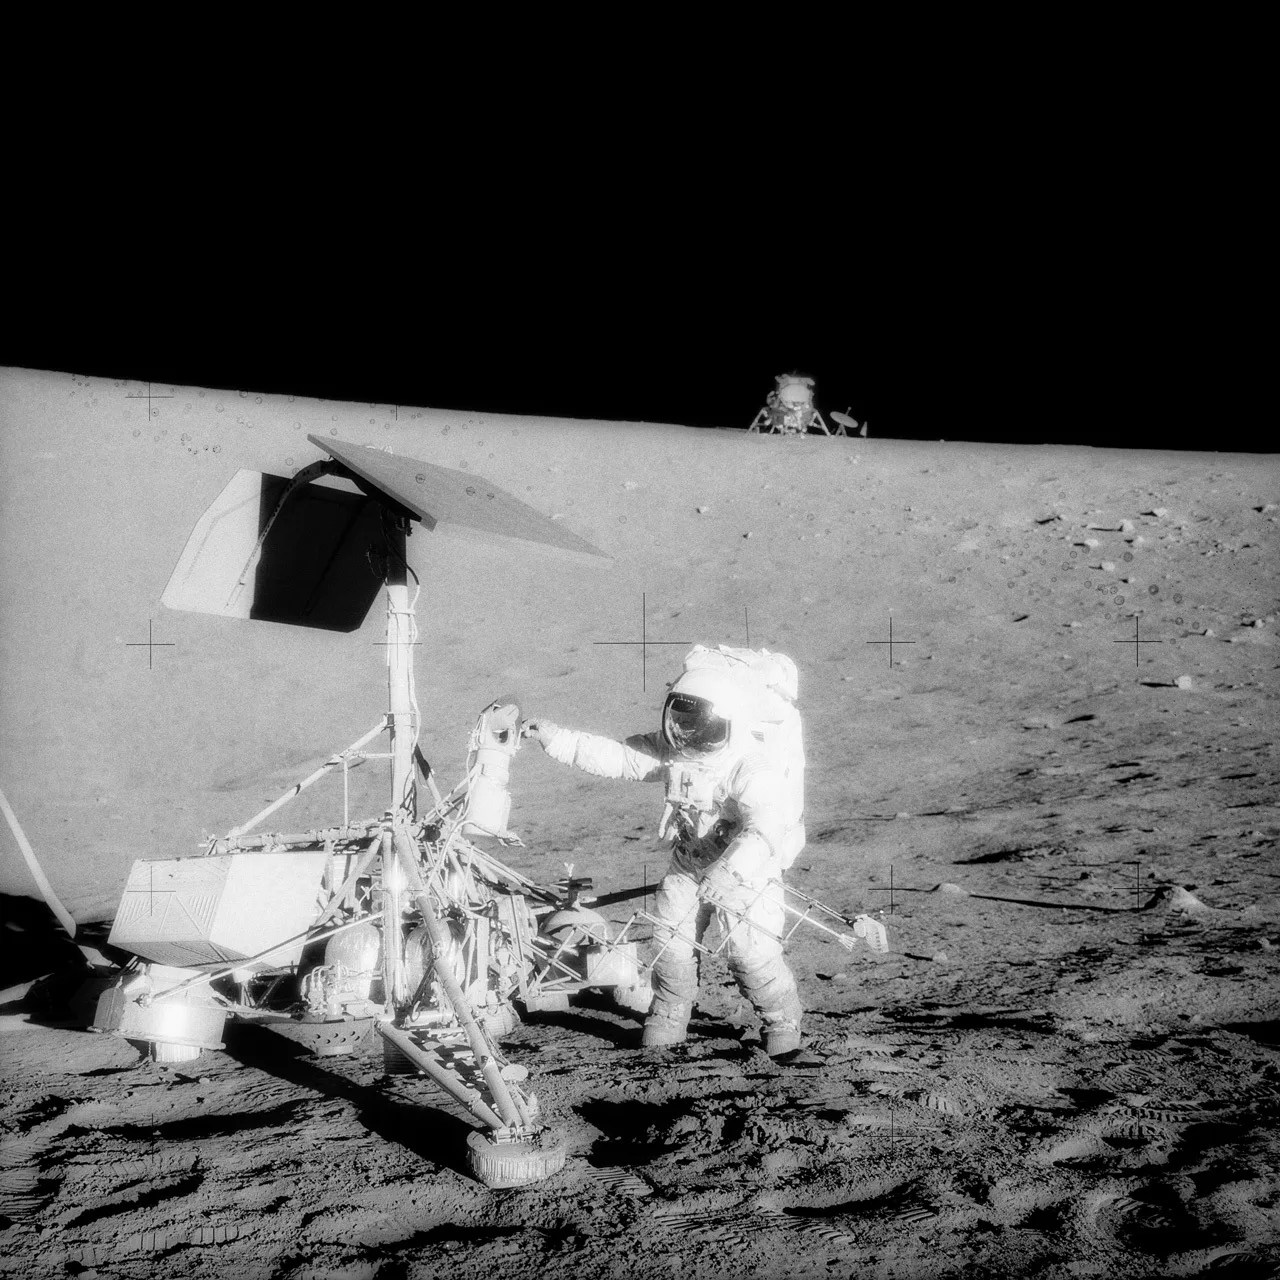 Astronaut in a white spacesuit standing on the surface of the Moon next to a robotic spacecraft with his human crew vehicle on the horizon.